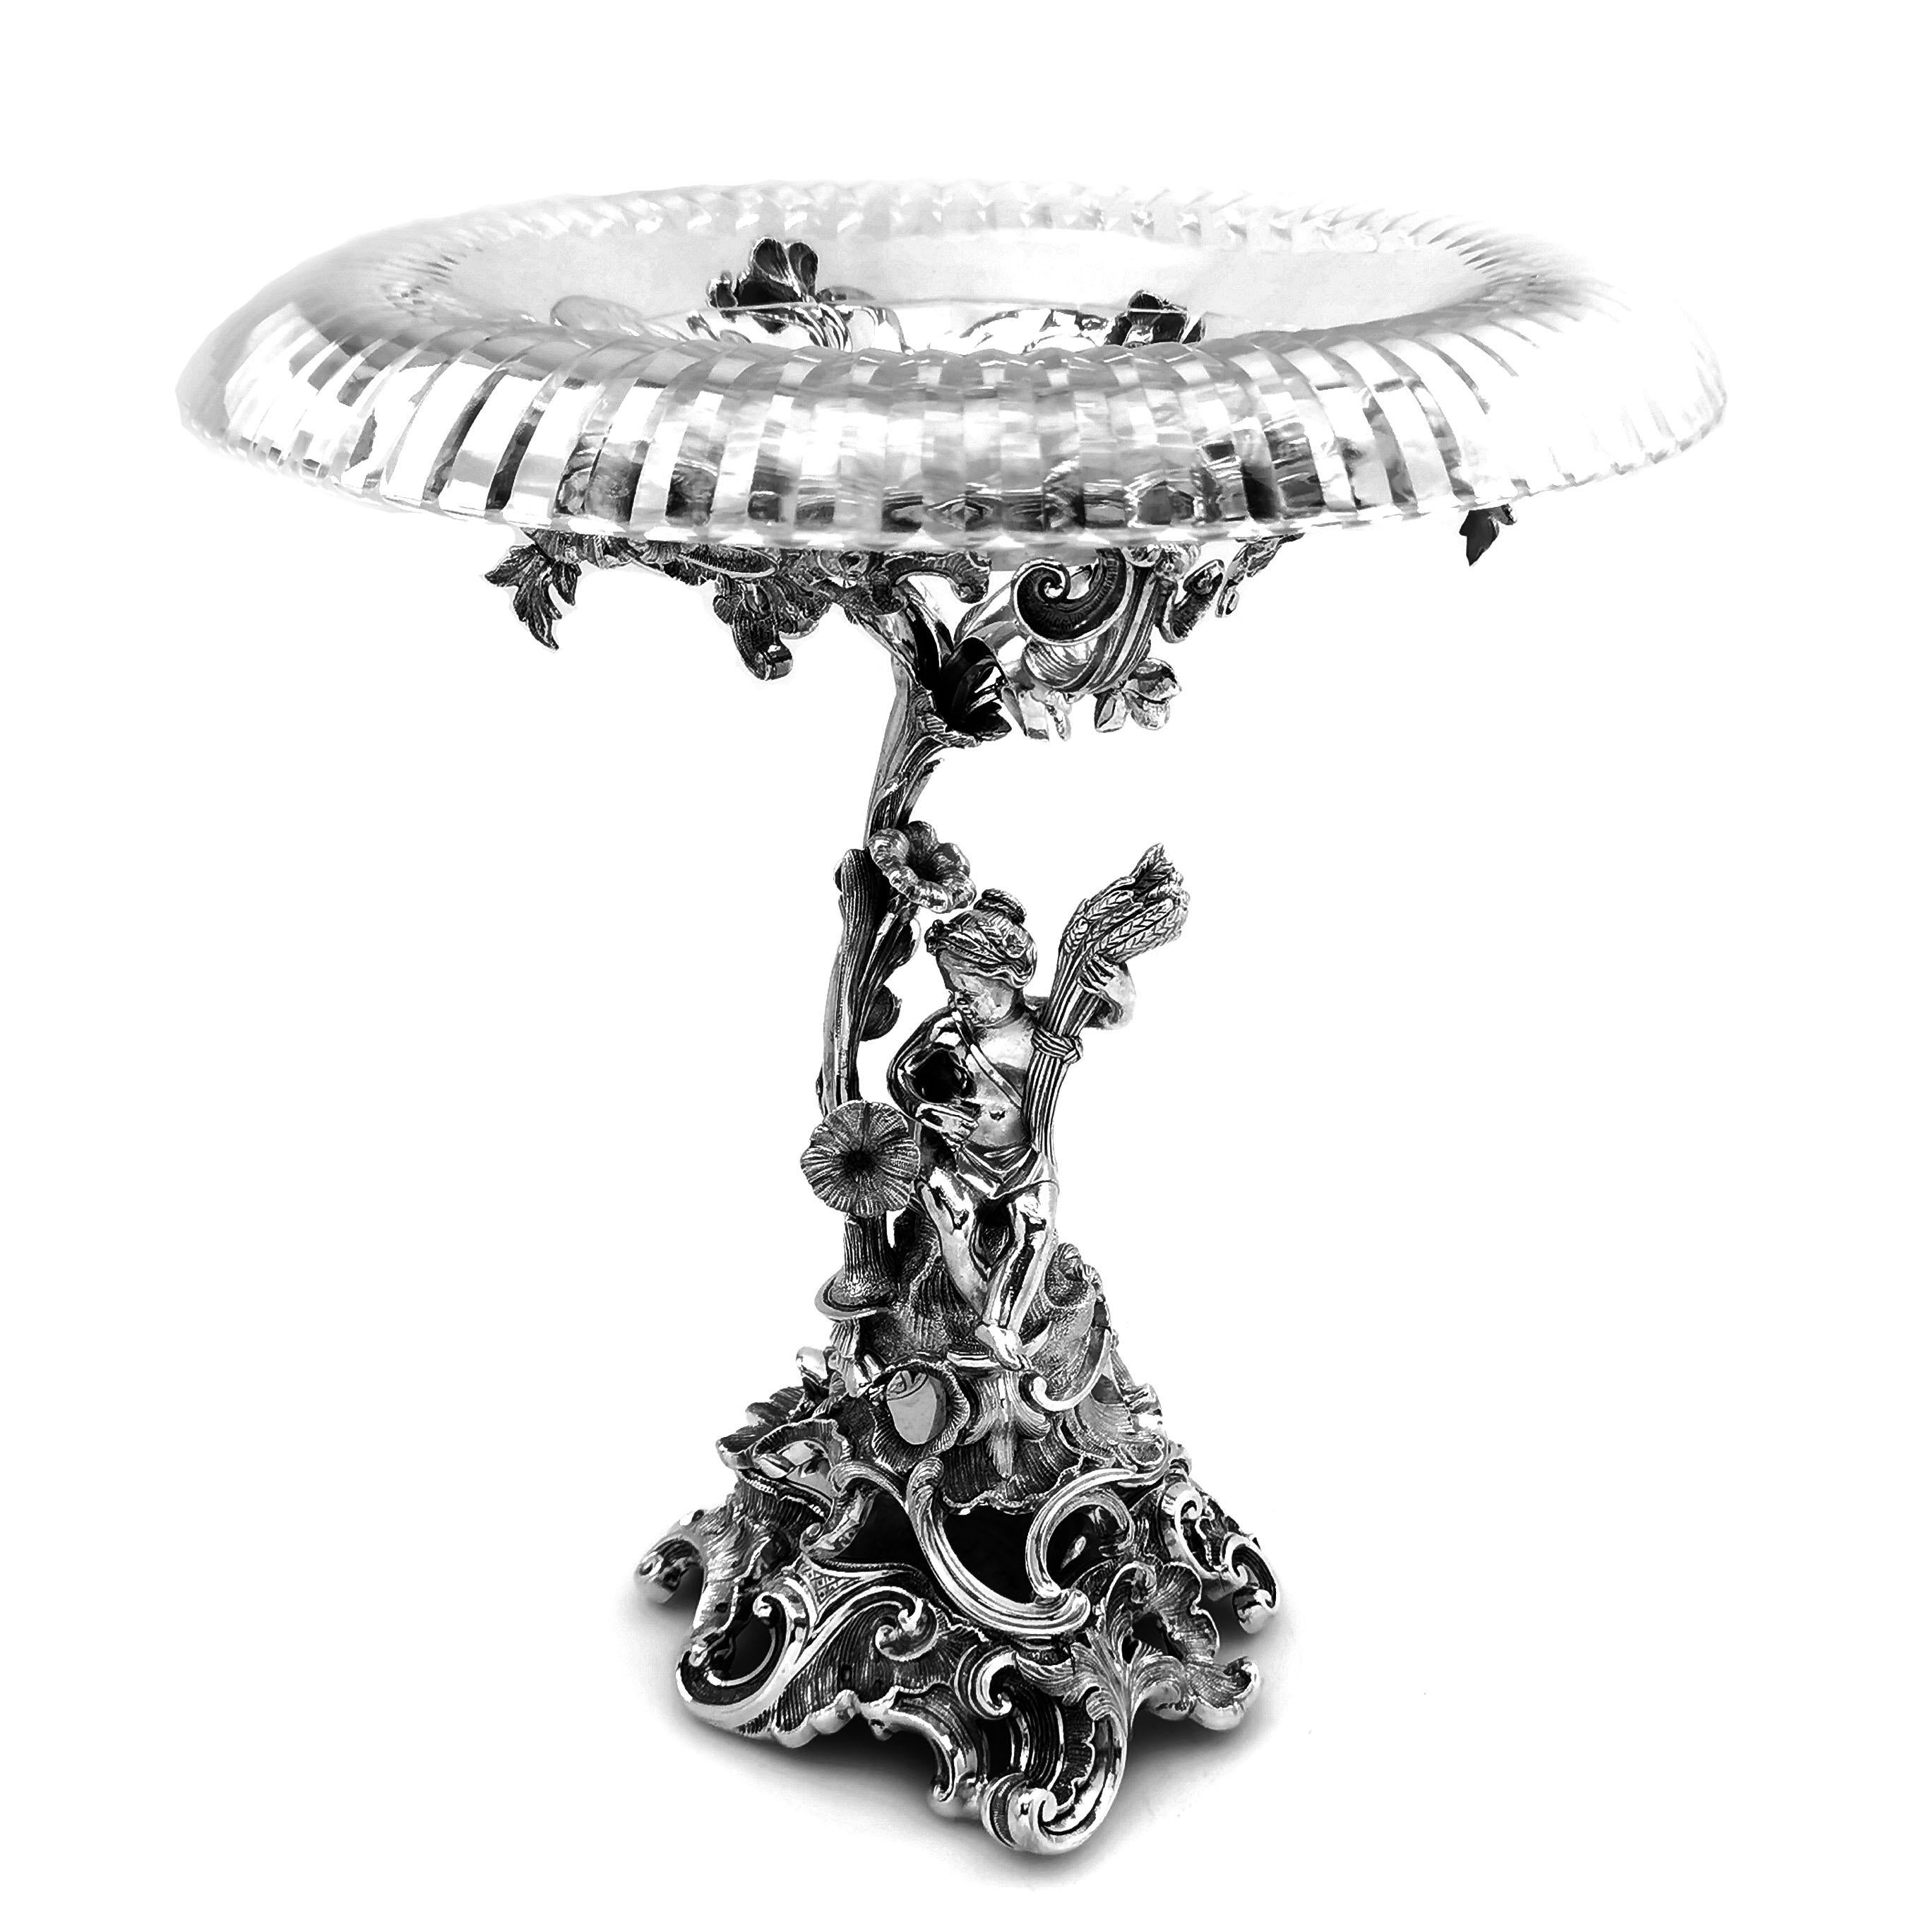 A magnificent pair of Antique German solid Silver and cut Glass Comports. These Comports have beautiful solid silver bases of a floral and scroll designs, each with a figure included in the central column. The column opens up into a floral stylised